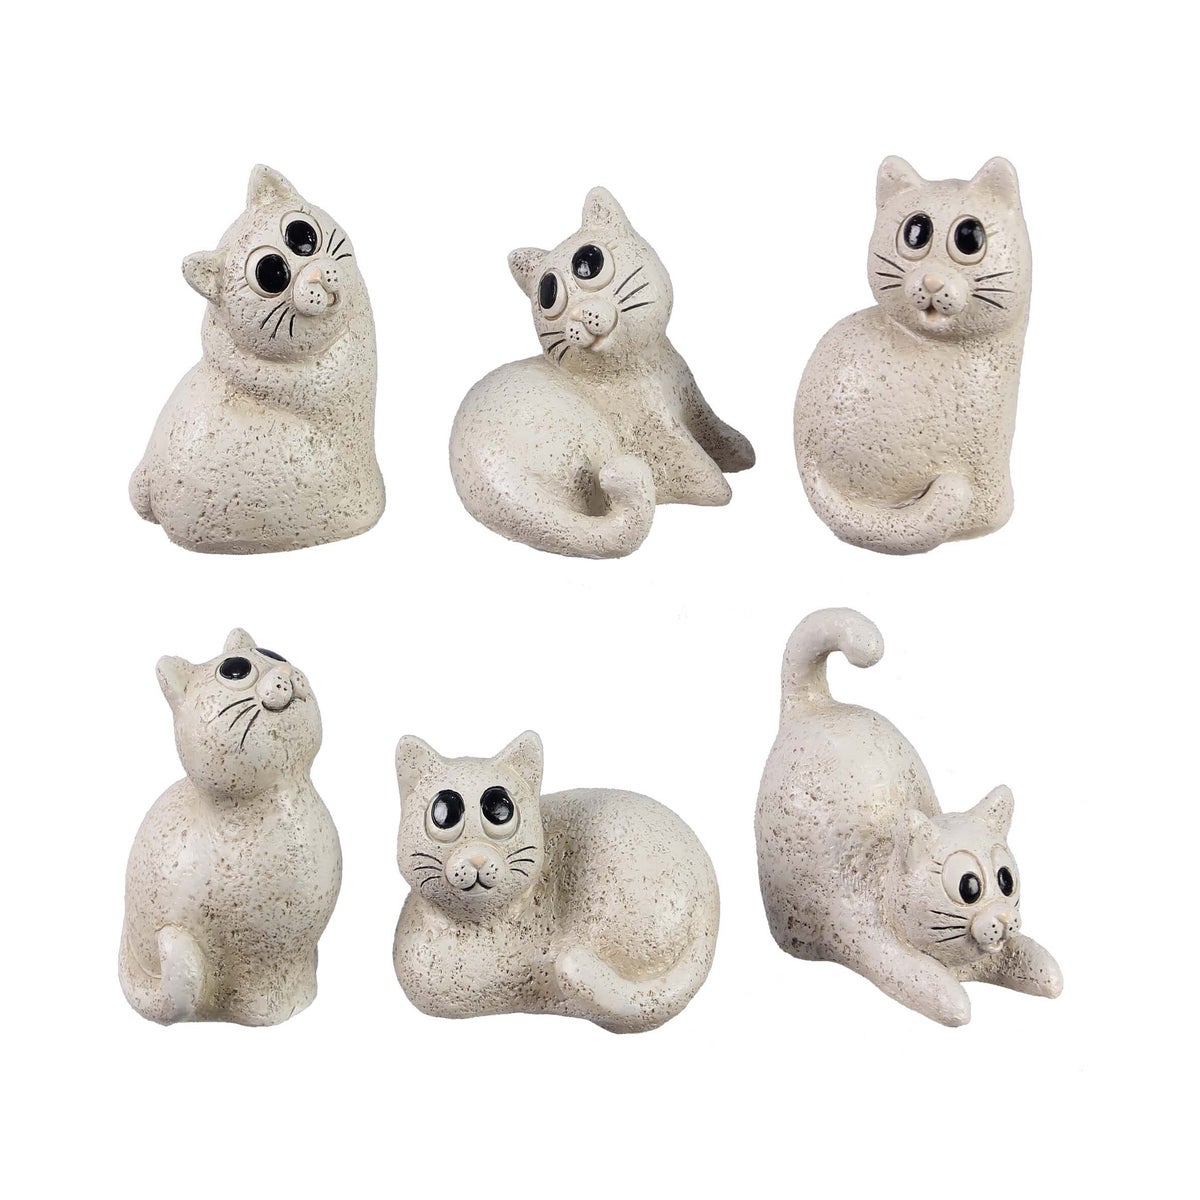 Resin Playful Cat Figurines, 6 Assorted